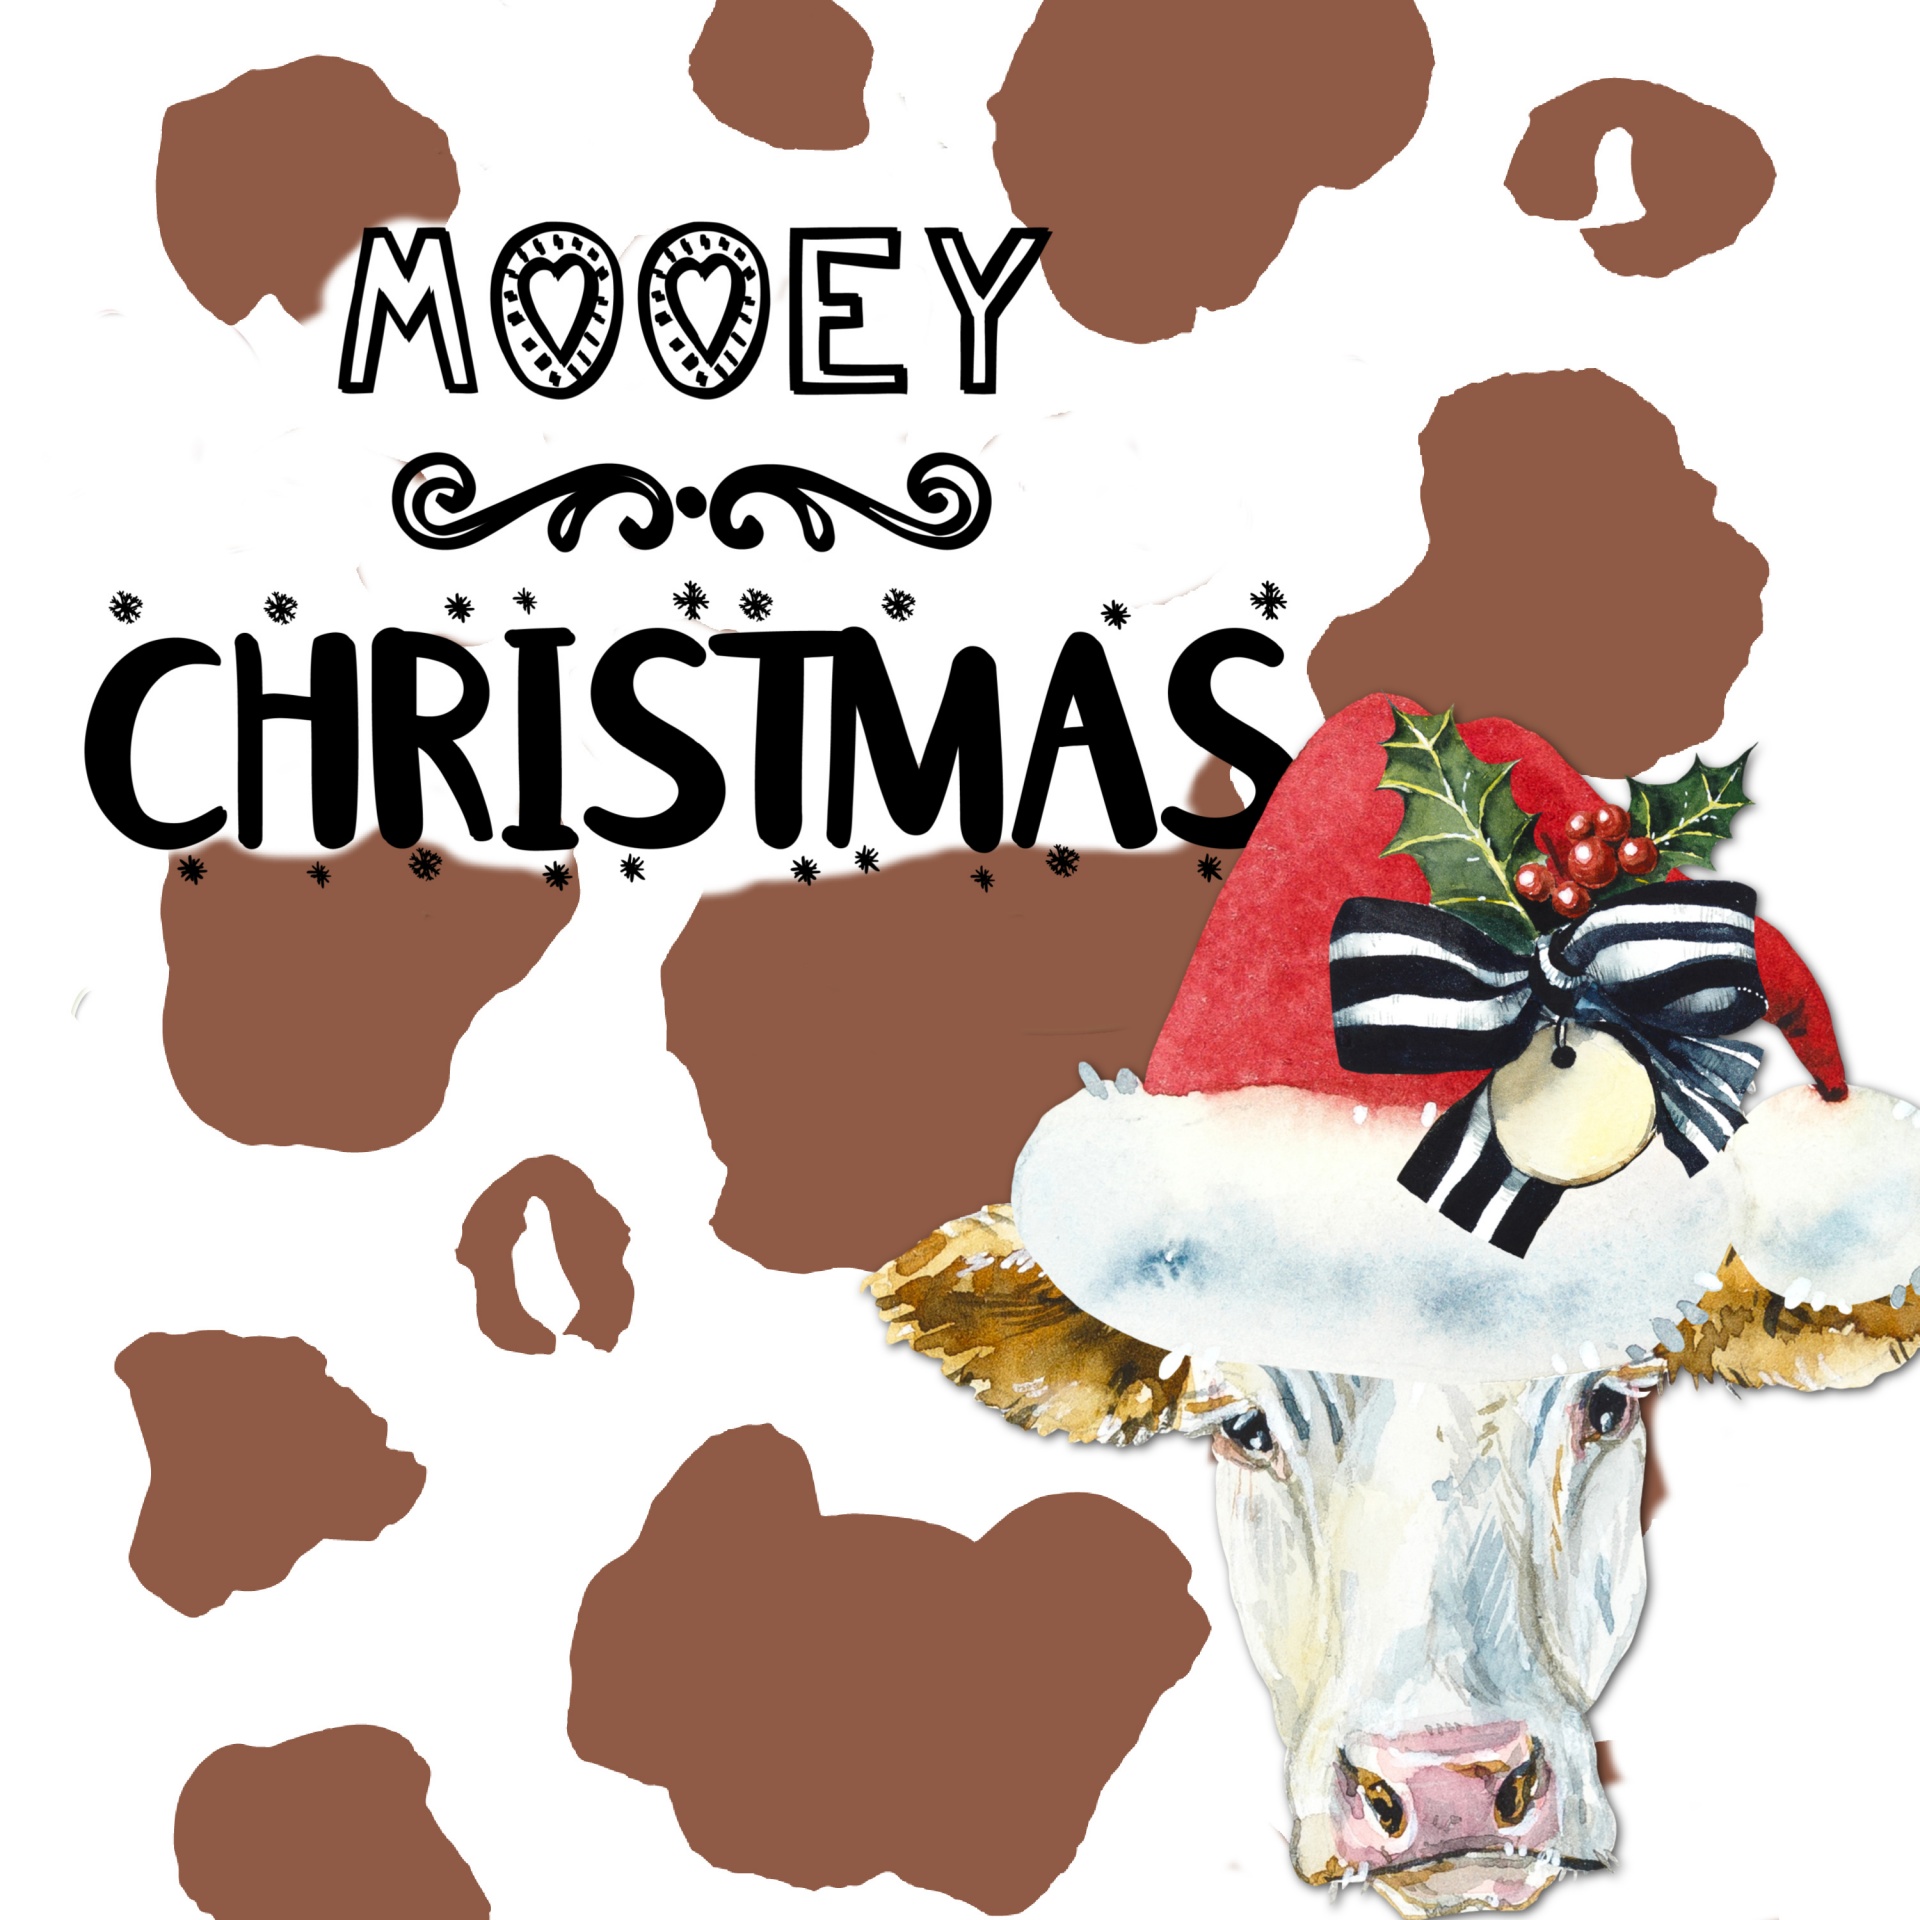 darling face of a bull or cow with words MOOEY CHRISTMAS